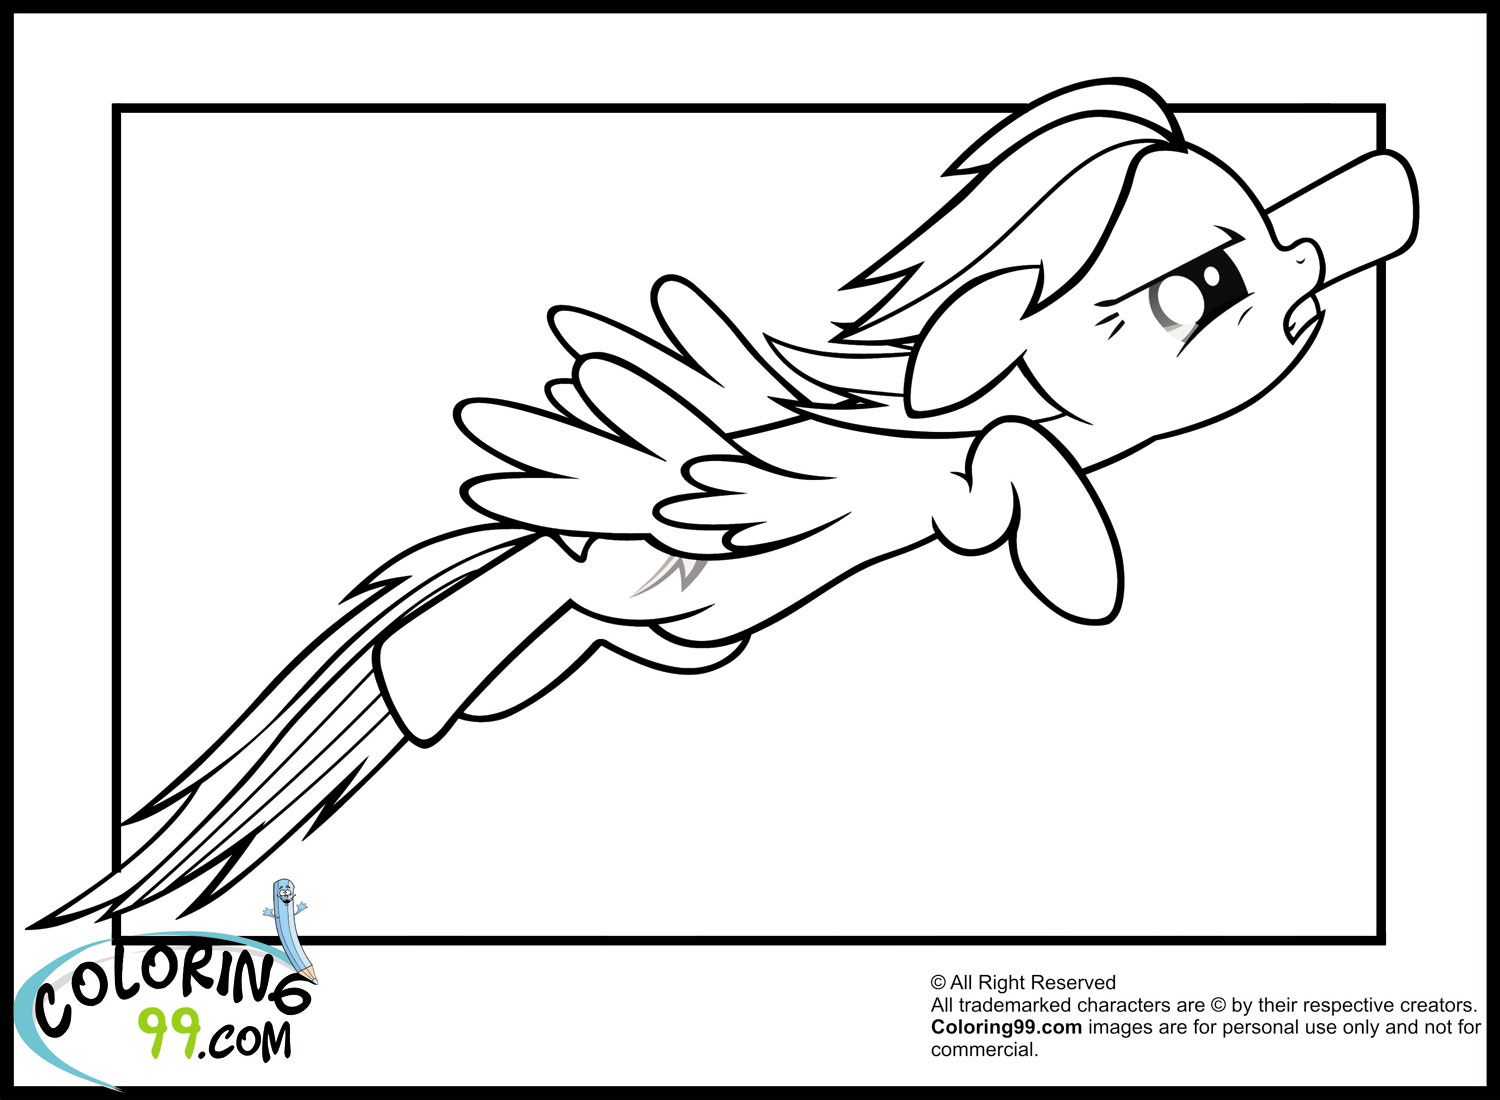 rainbow dash colouring pages rainbow dash coloring page clipart panda free clipart colouring rainbow pages dash 